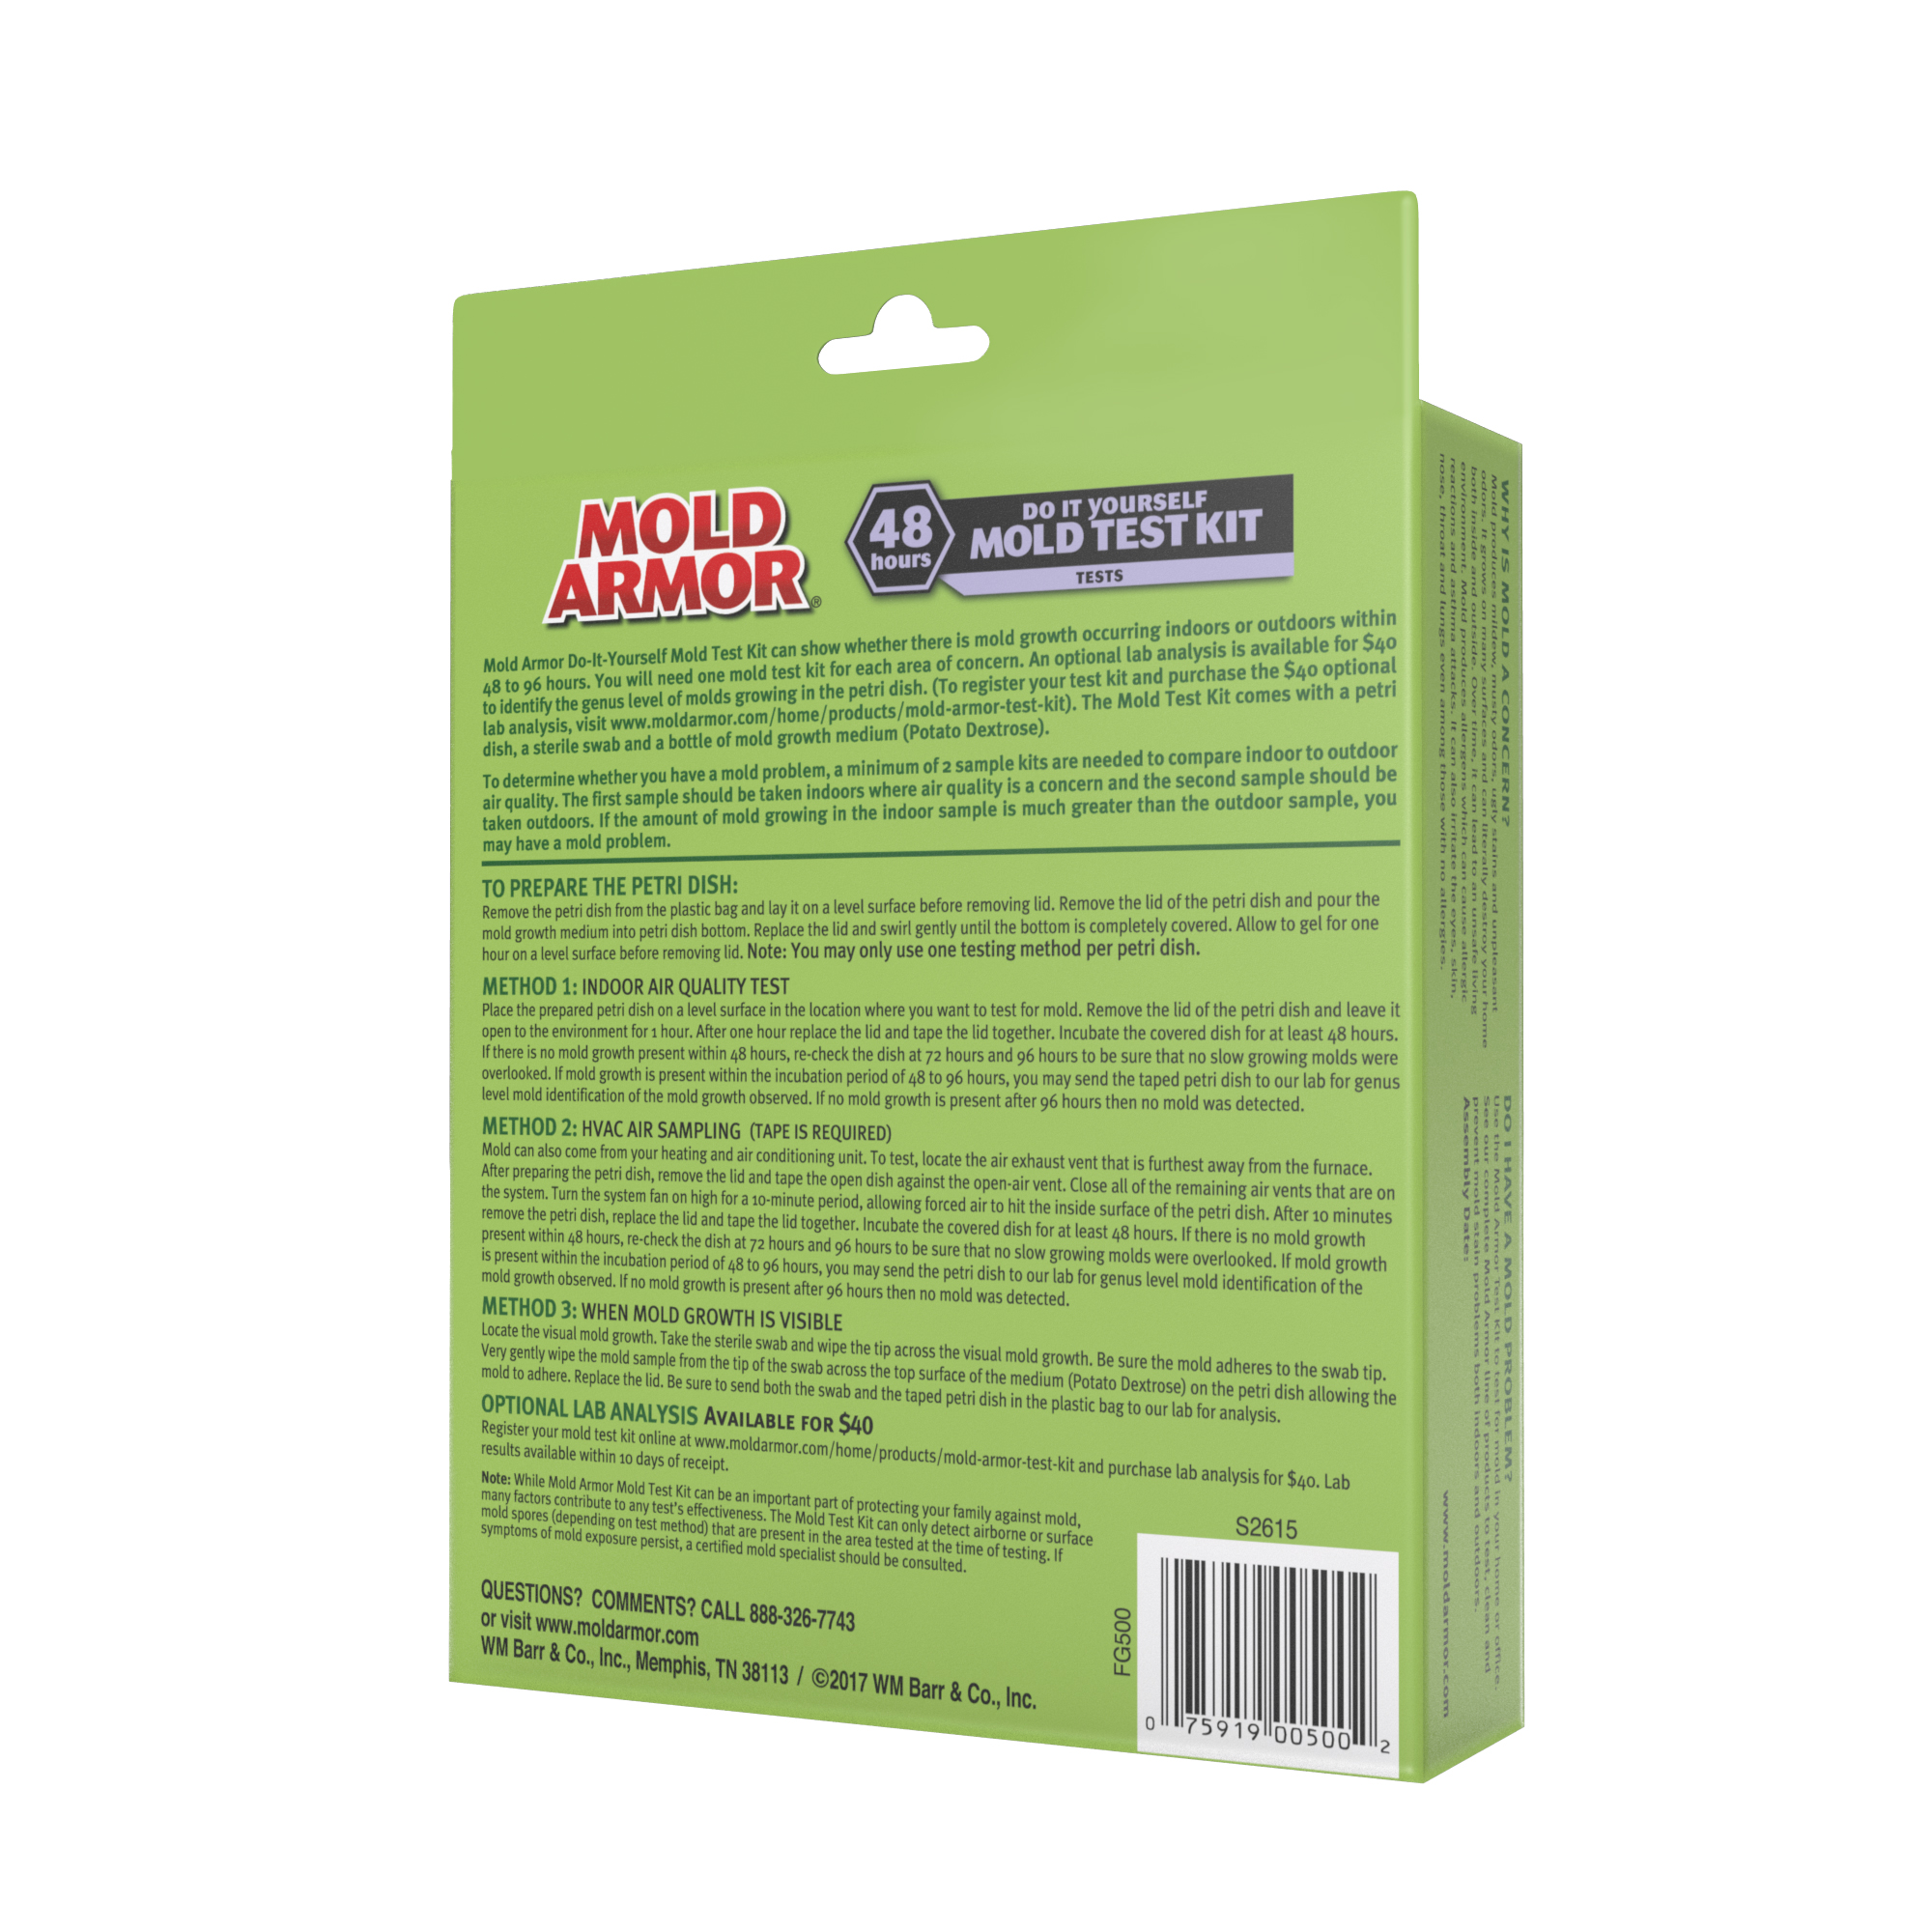 New Mold Armor 48 hours Do It Yourself Mold Test Kit FG500 Indoor/Outdoor